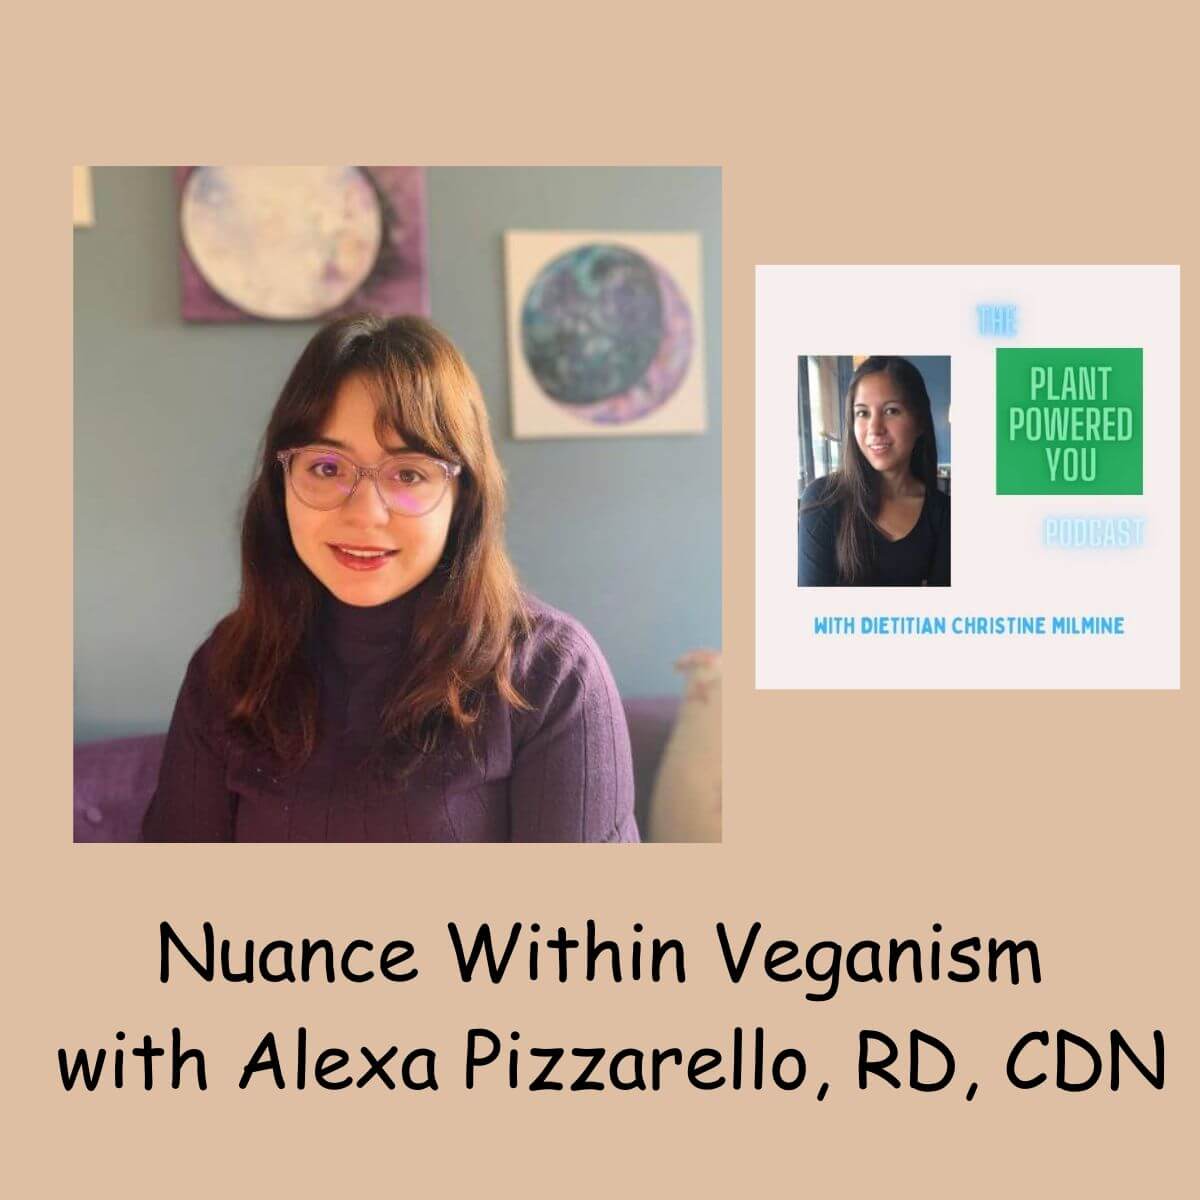 Images include a picture of Alexa Pizzarello (a dietitian) and a separate picture of christine with the words: the plant Powered you podcast with dietitian Christine milmine. Title Reads: for nuance within veganism with Alexa Pizzarello, RD, CDN